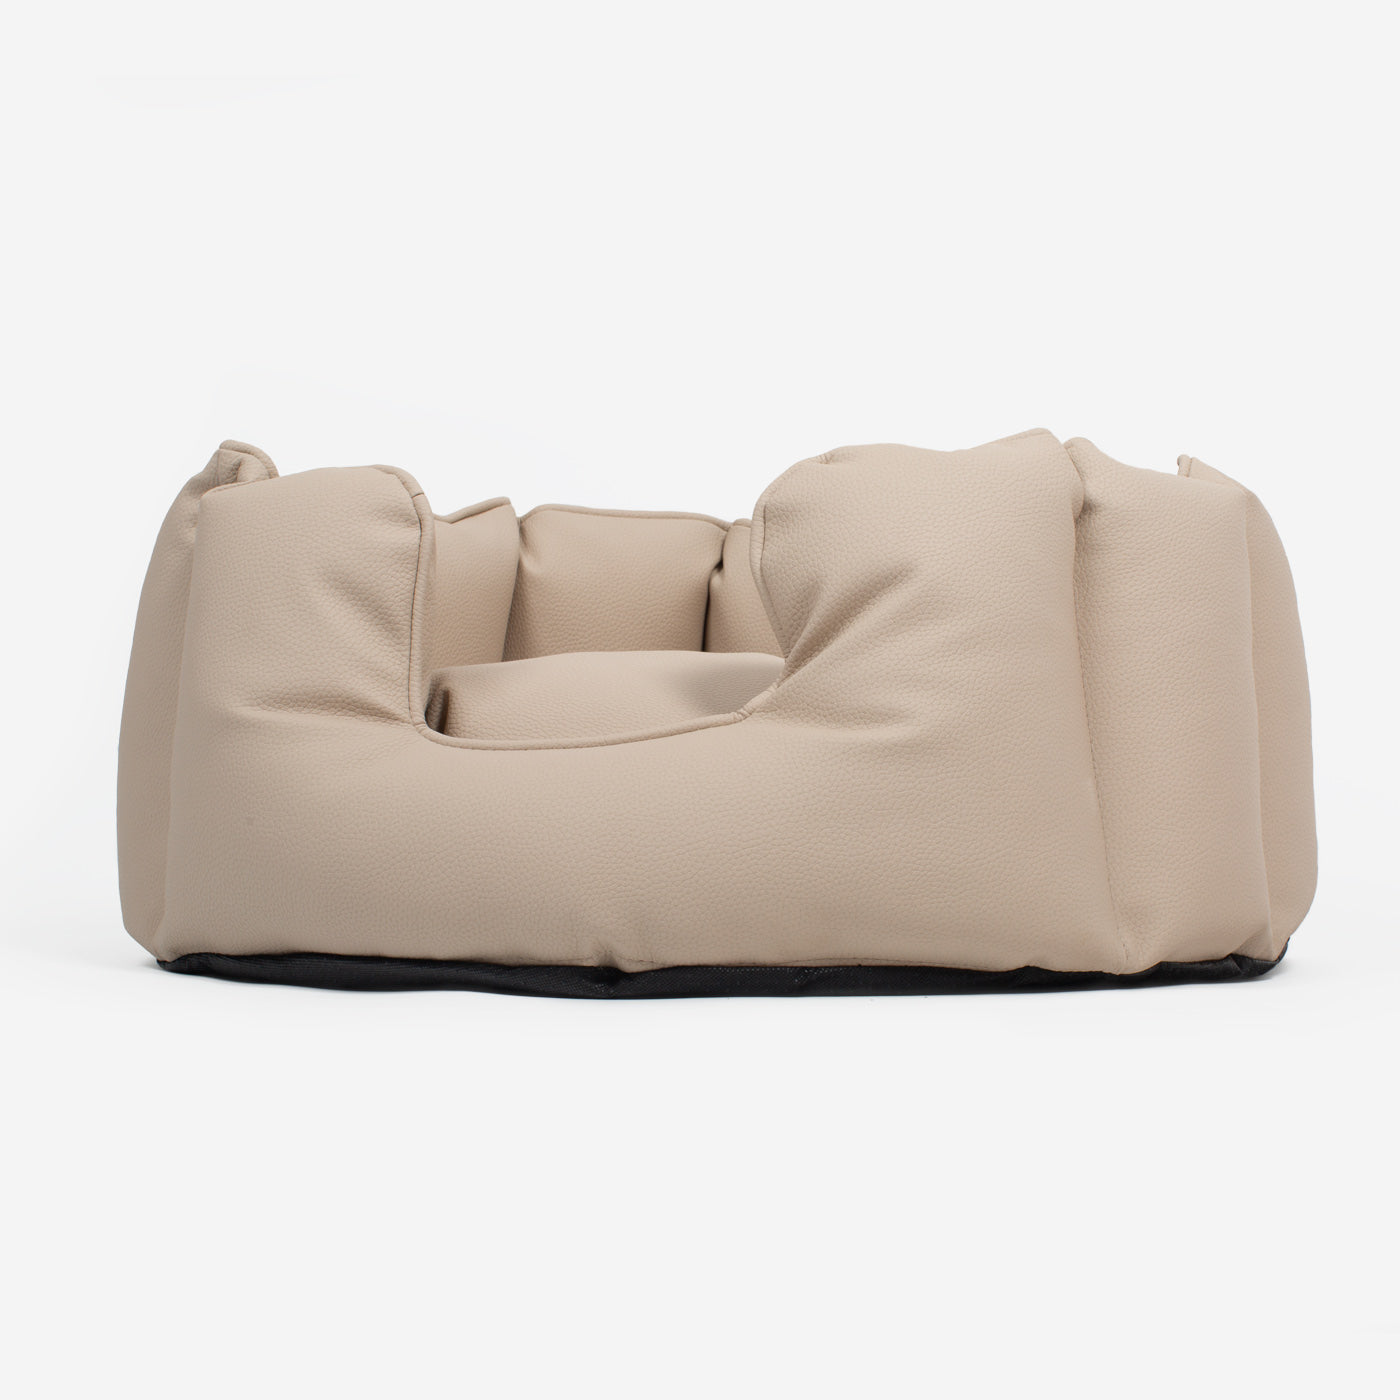 [colour:sand] Luxury Handmade High Wall in Rhino Tough Faux Leather, in Sand, Perfect For Your Pets Nap Time! Available To Personalise at Lords & Labradors